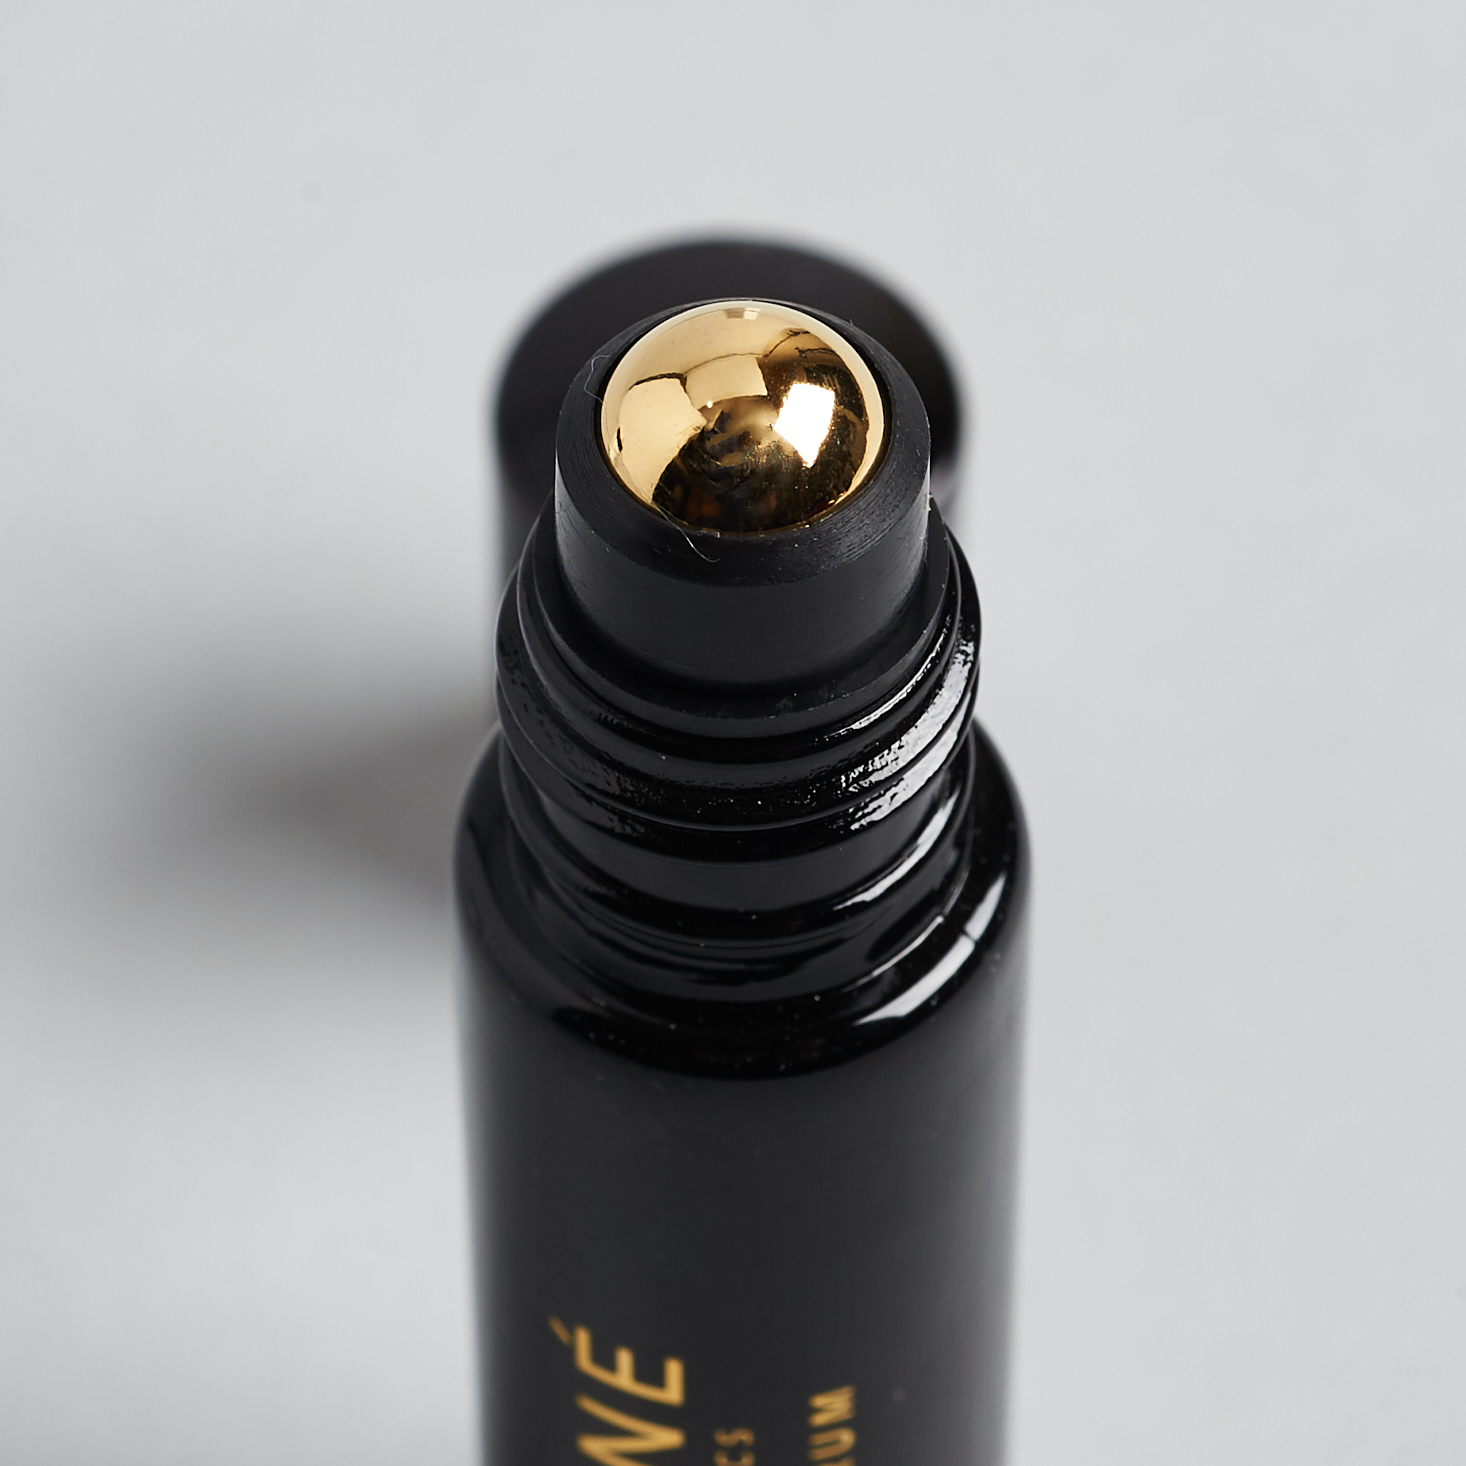 close up of gold roller ball for Henne Organics Lip Serum with box